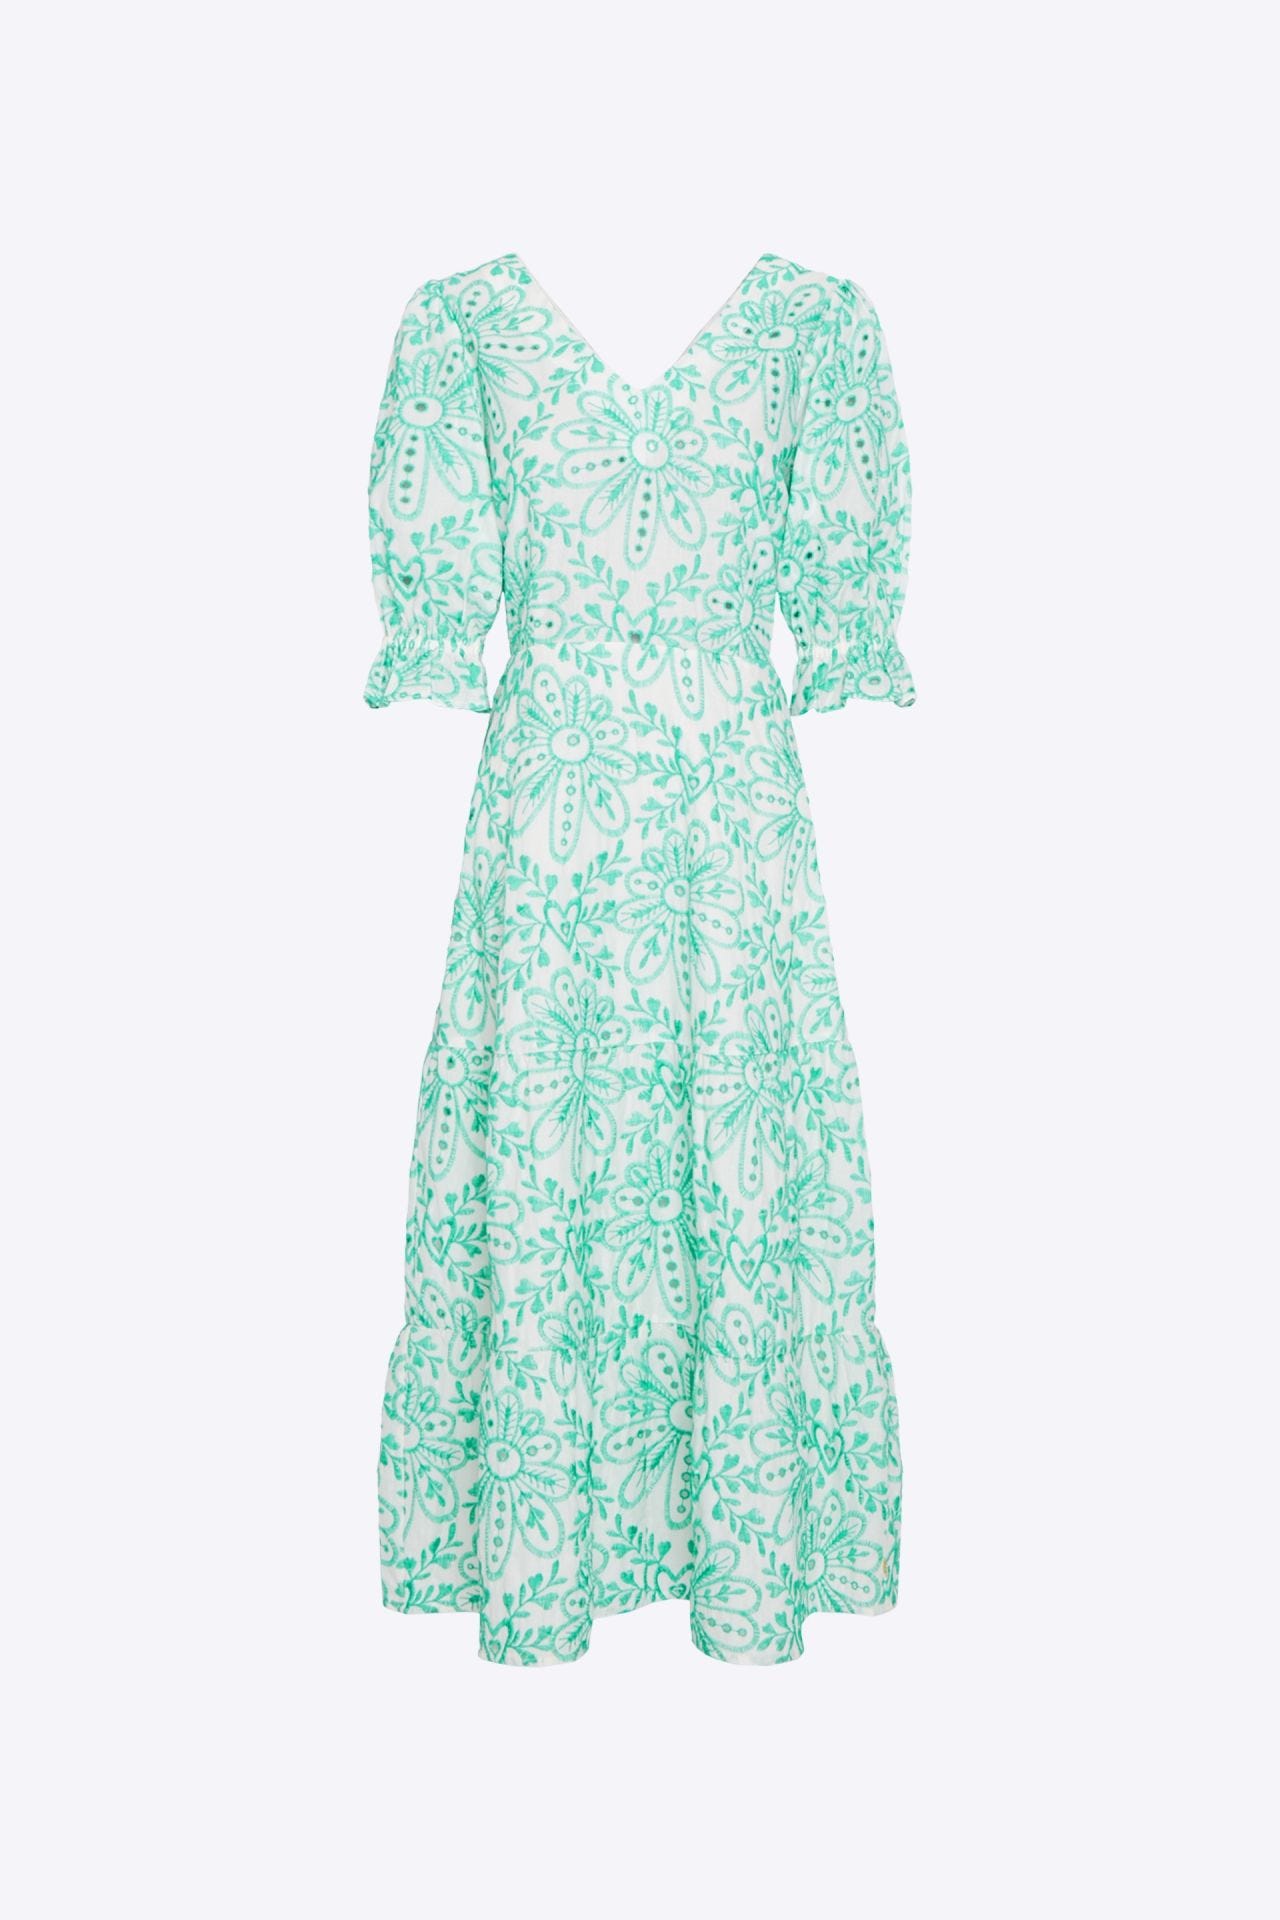 fabienne-chapot-cream-white-jolene-dress-with-green-embroidery